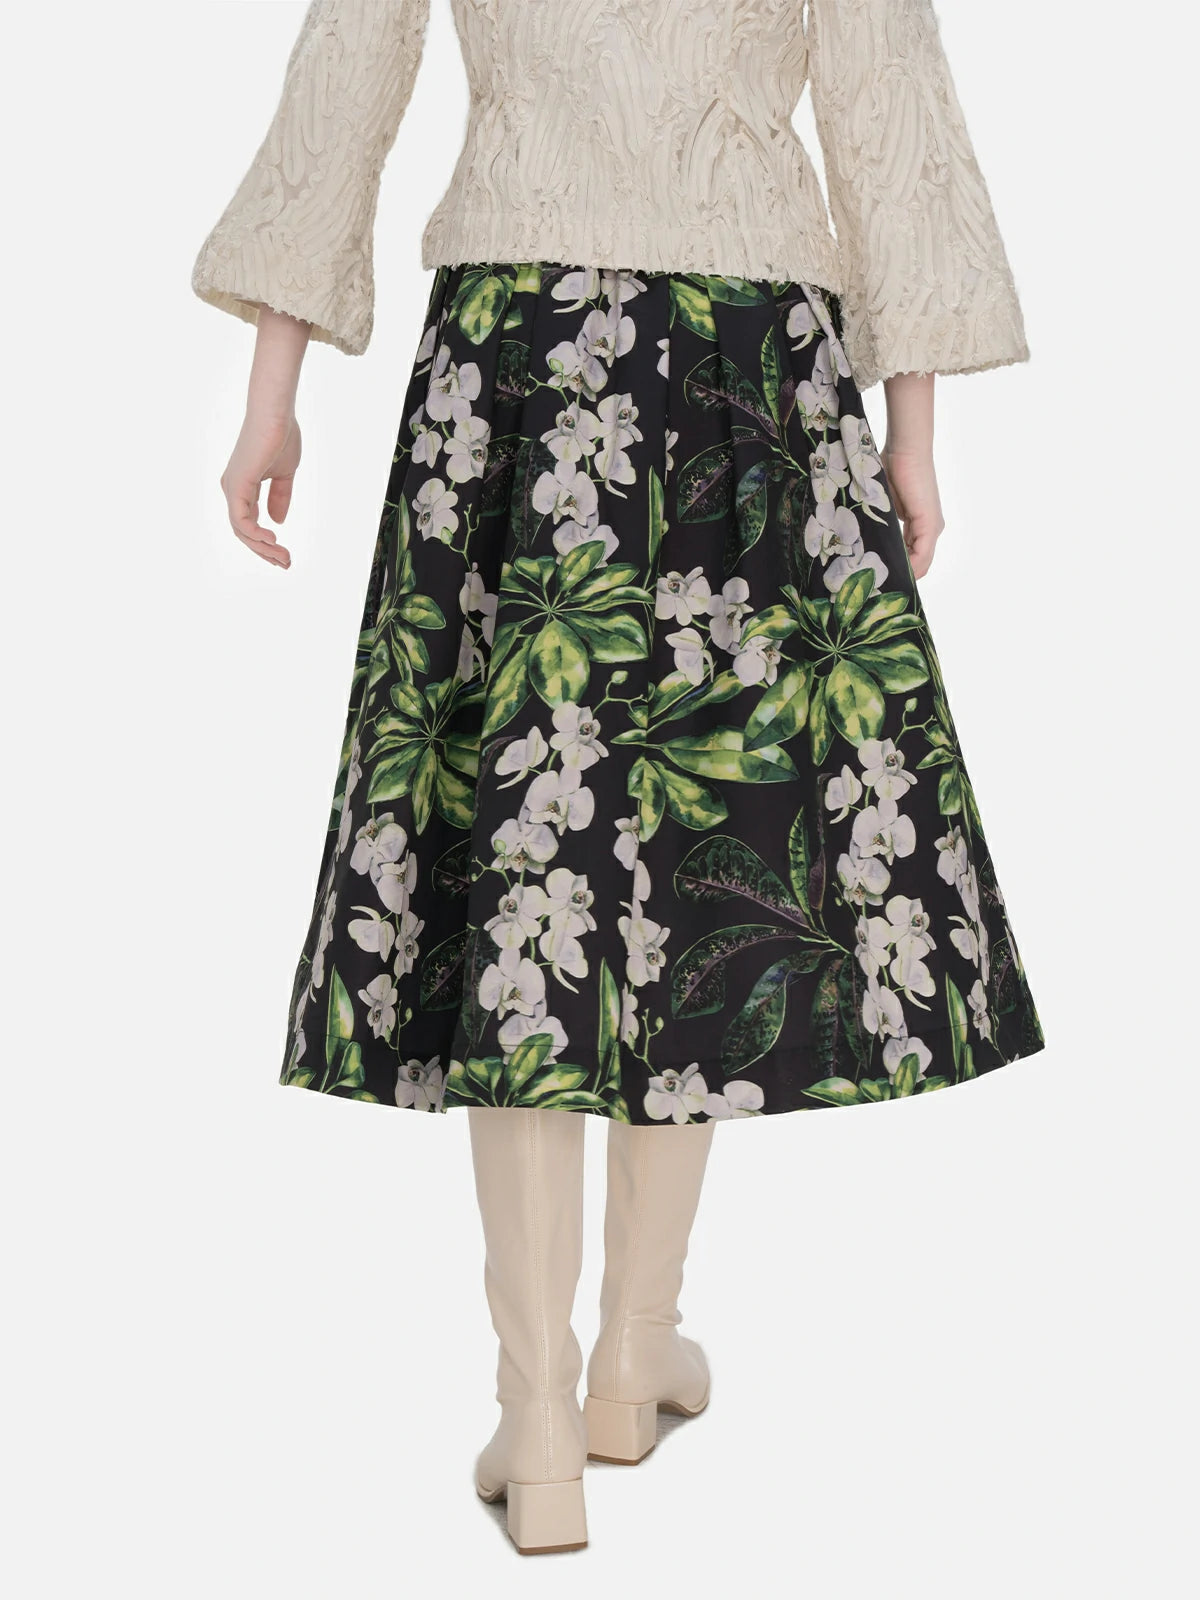 Elegant A-line midi skirt featuring a high-waisted design, vibrant color-blocked floral pattern, and layered pleats, creating a tailored fit suitable for different body types.